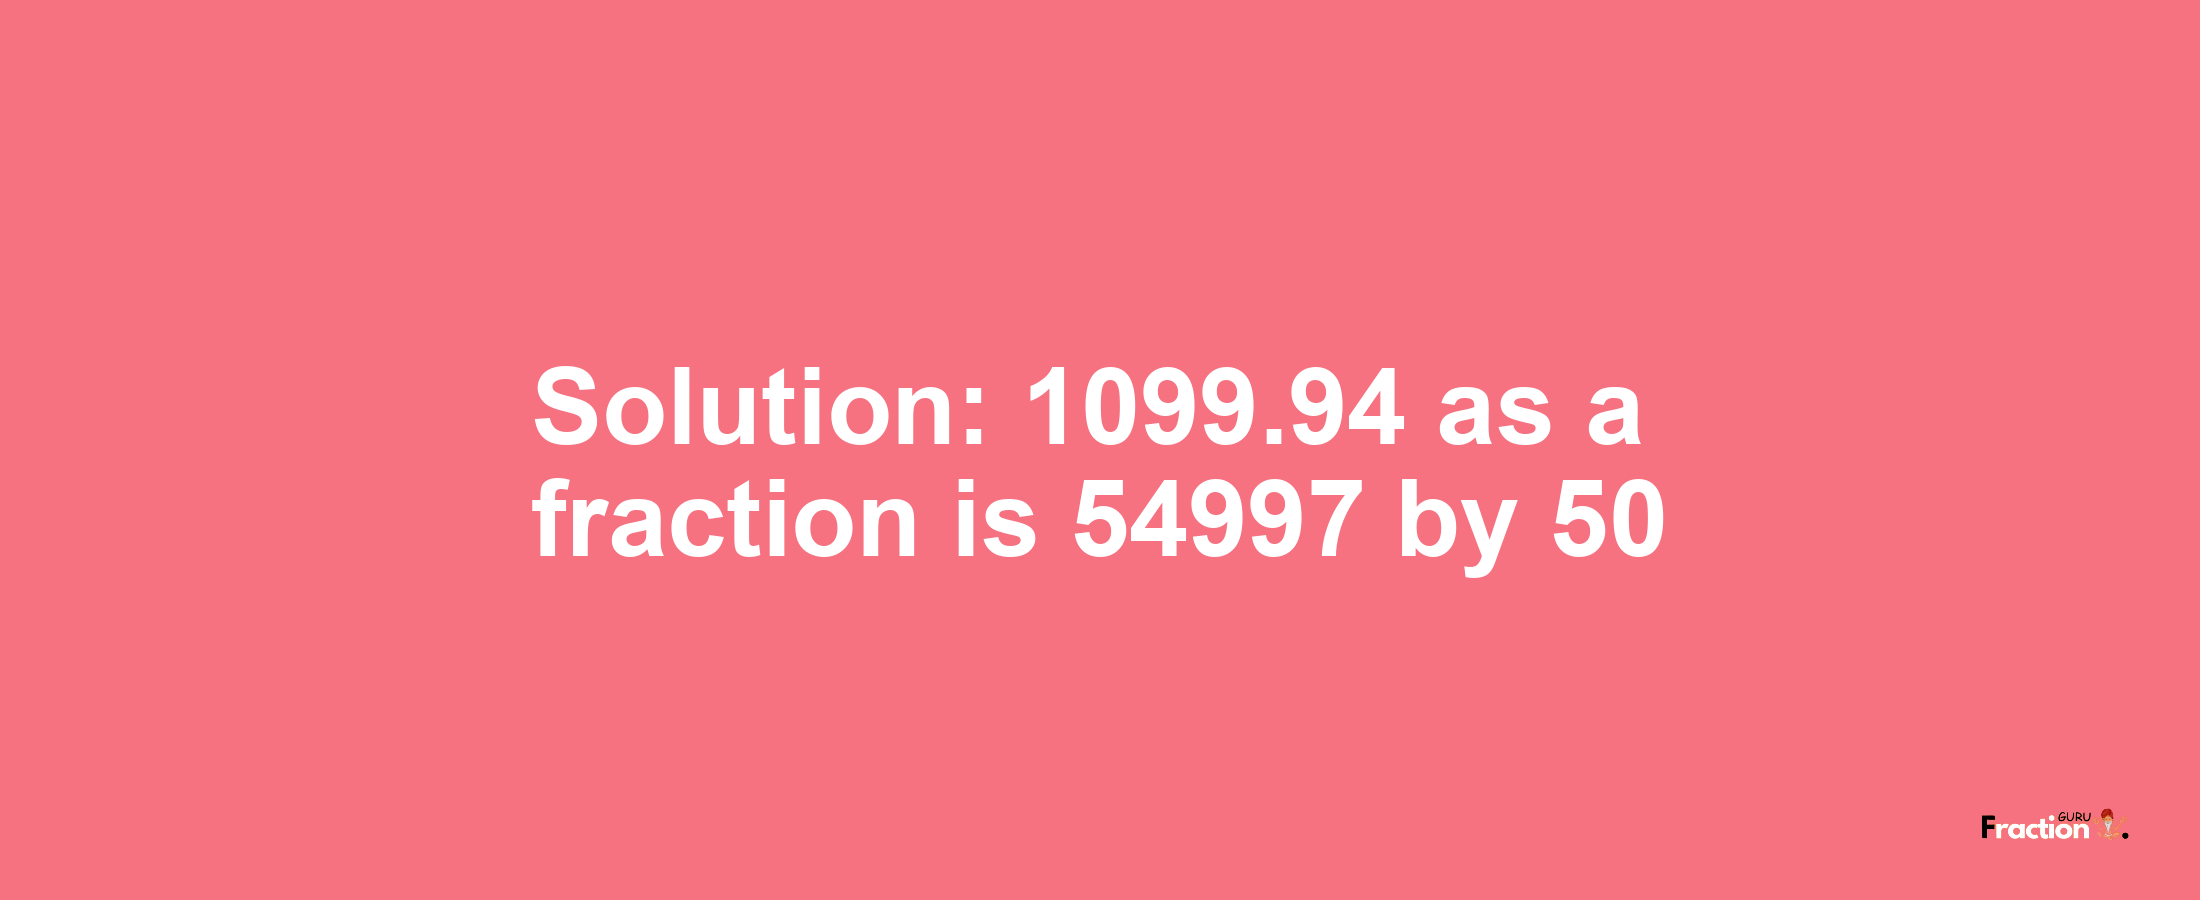 Solution:1099.94 as a fraction is 54997/50